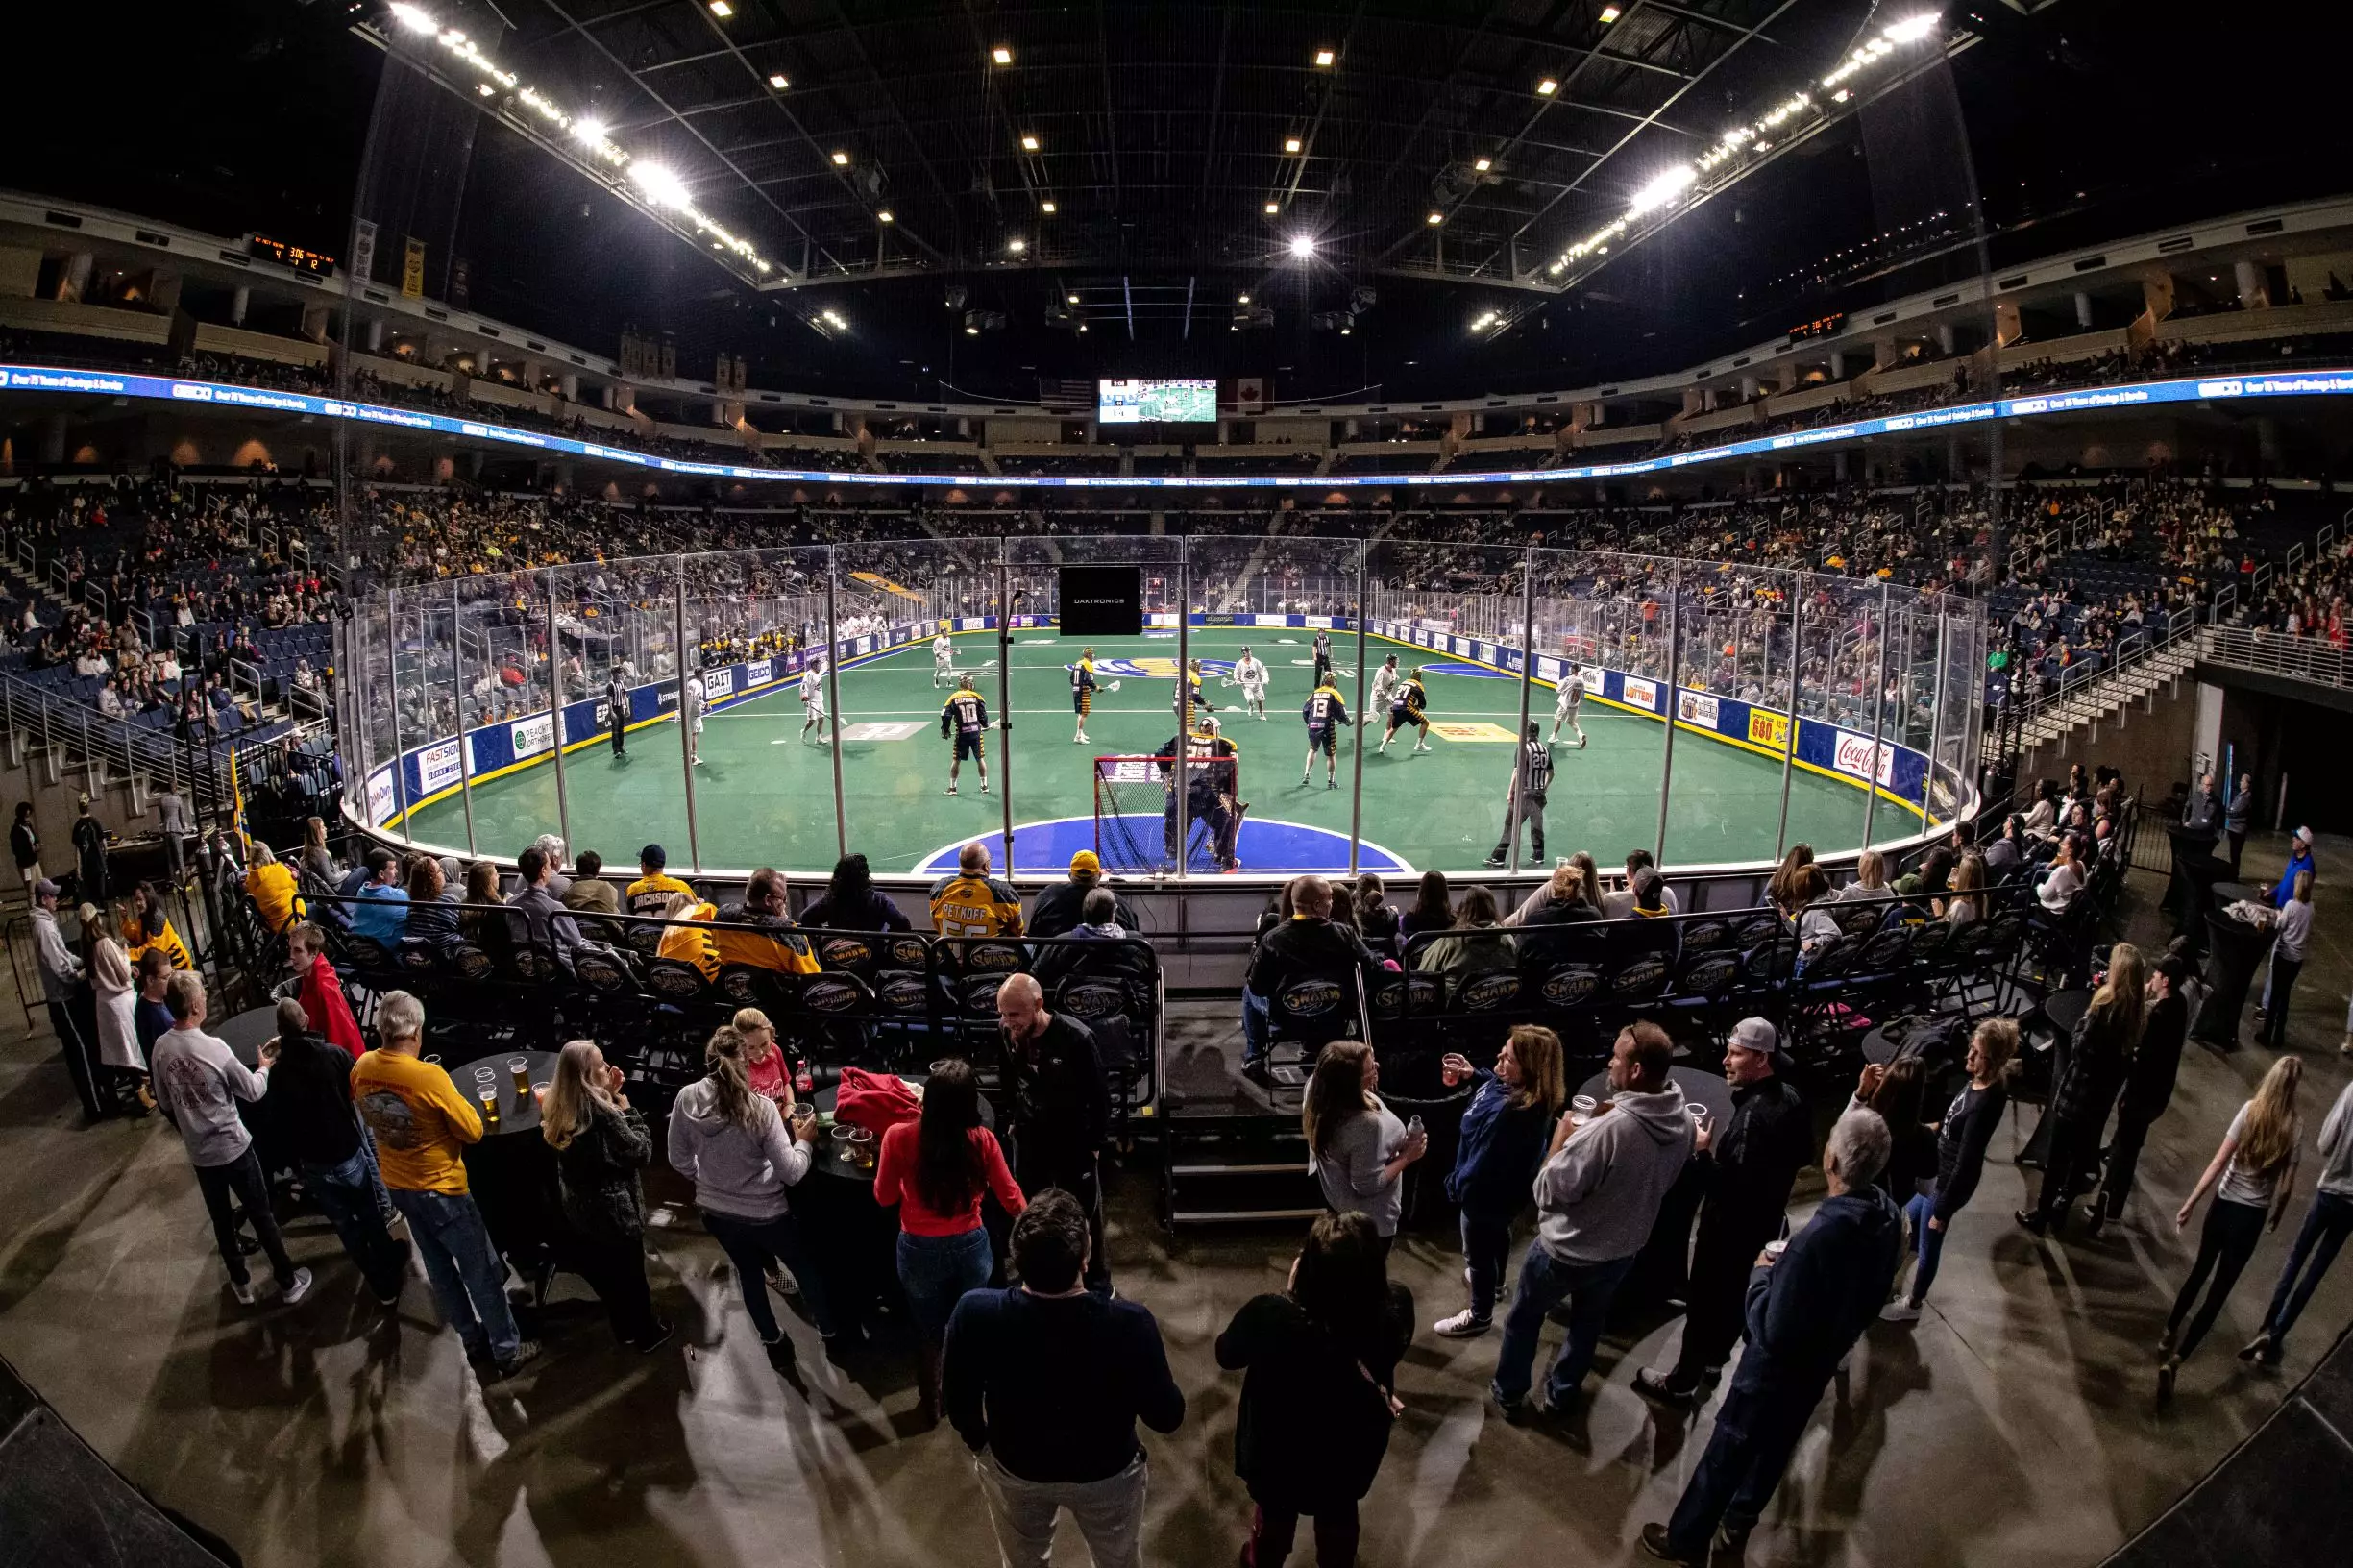 Swarm ink new threeyear lease agreement with Gas South Arena